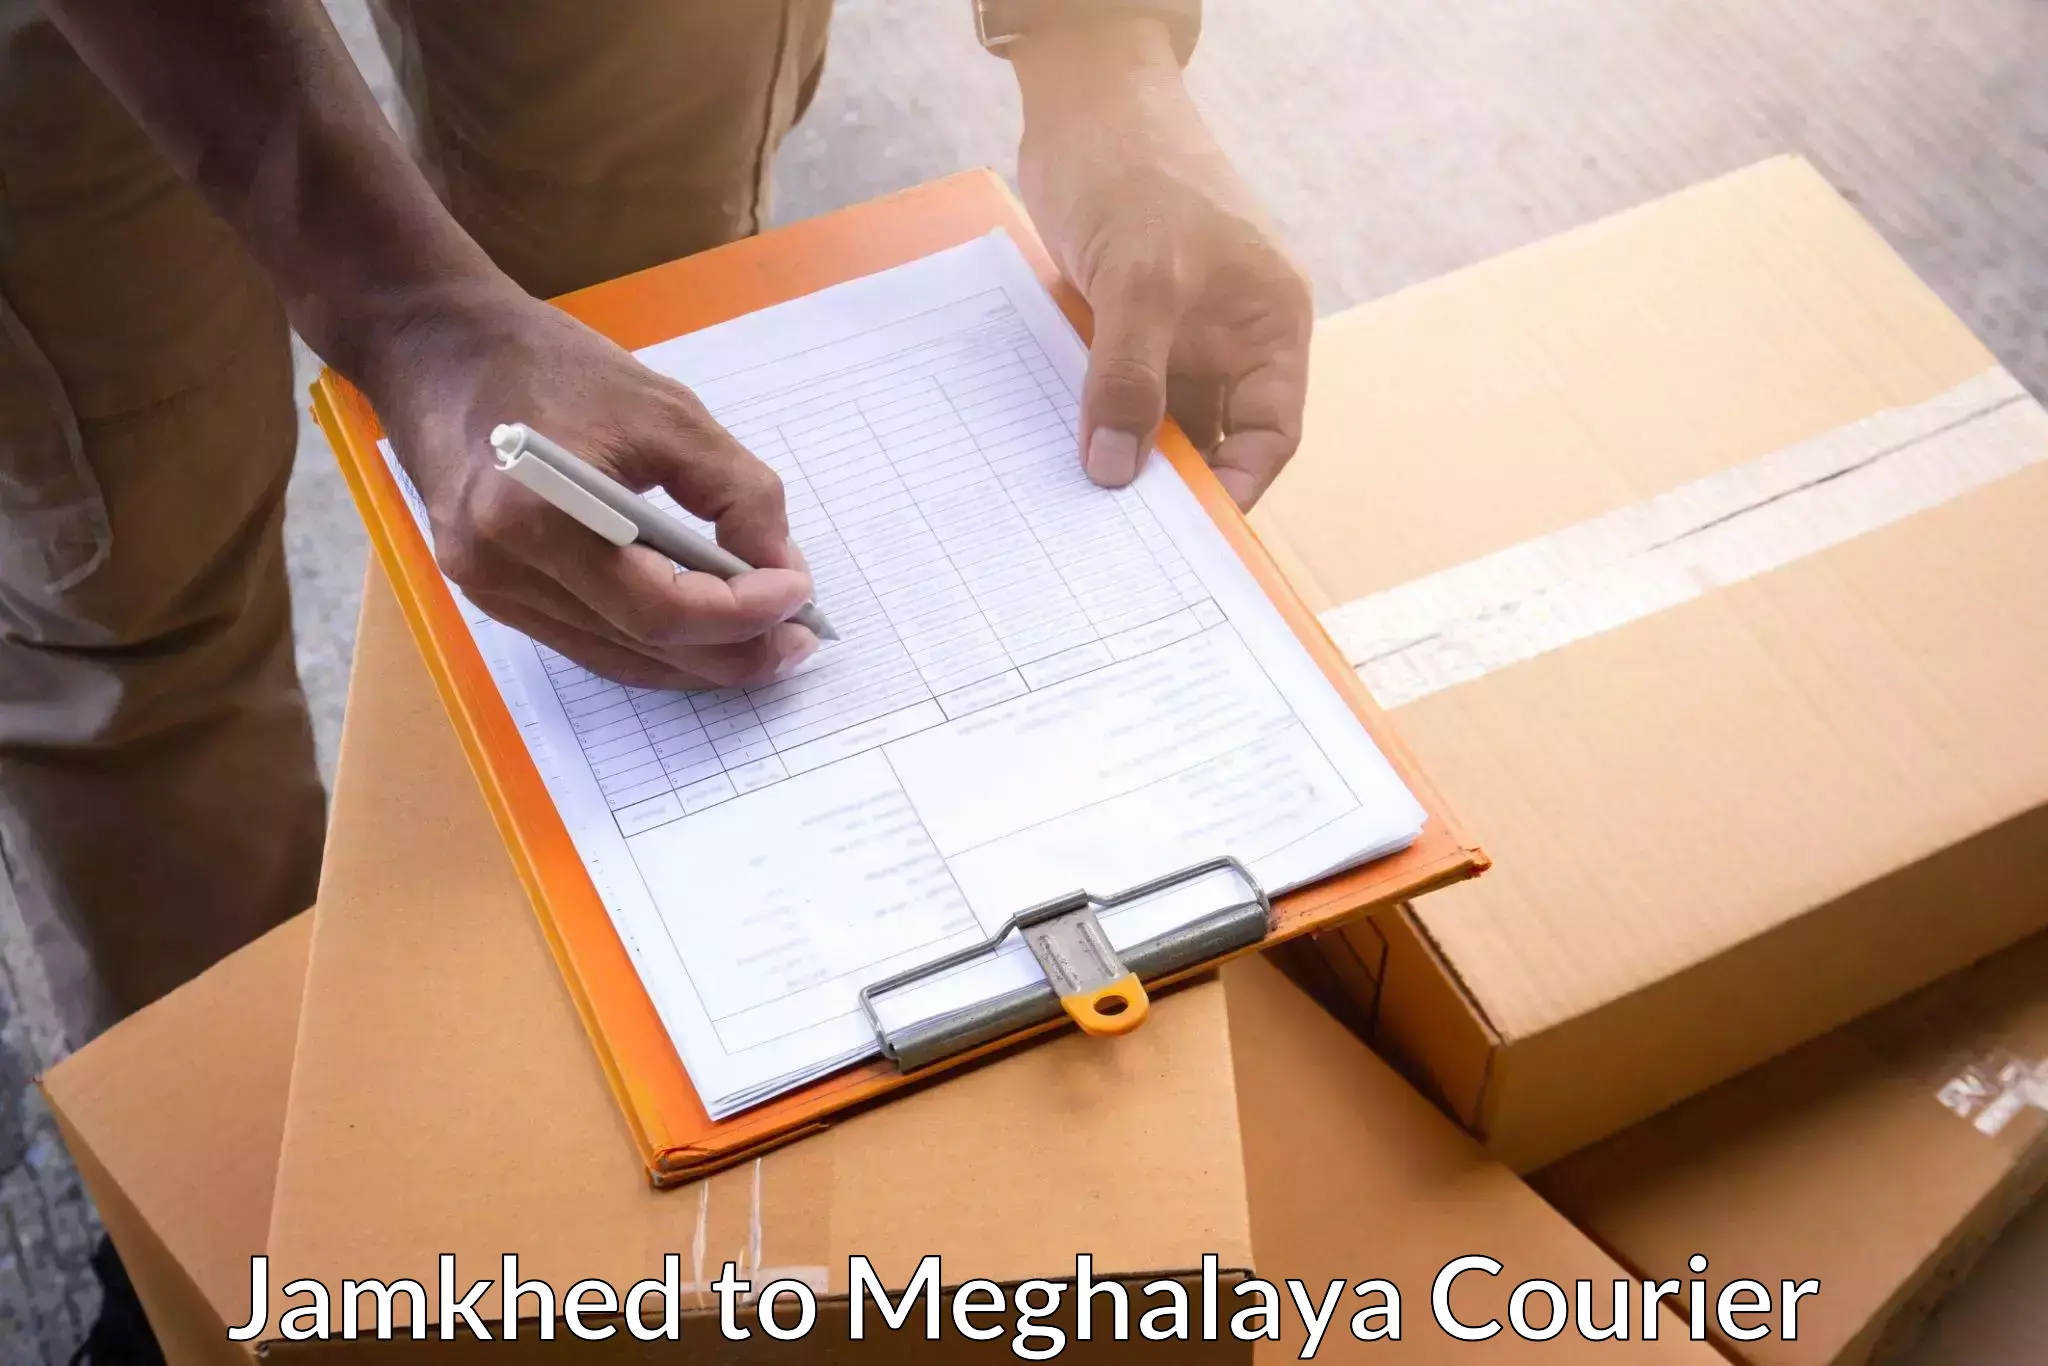 On-call courier service Jamkhed to Dkhiah West